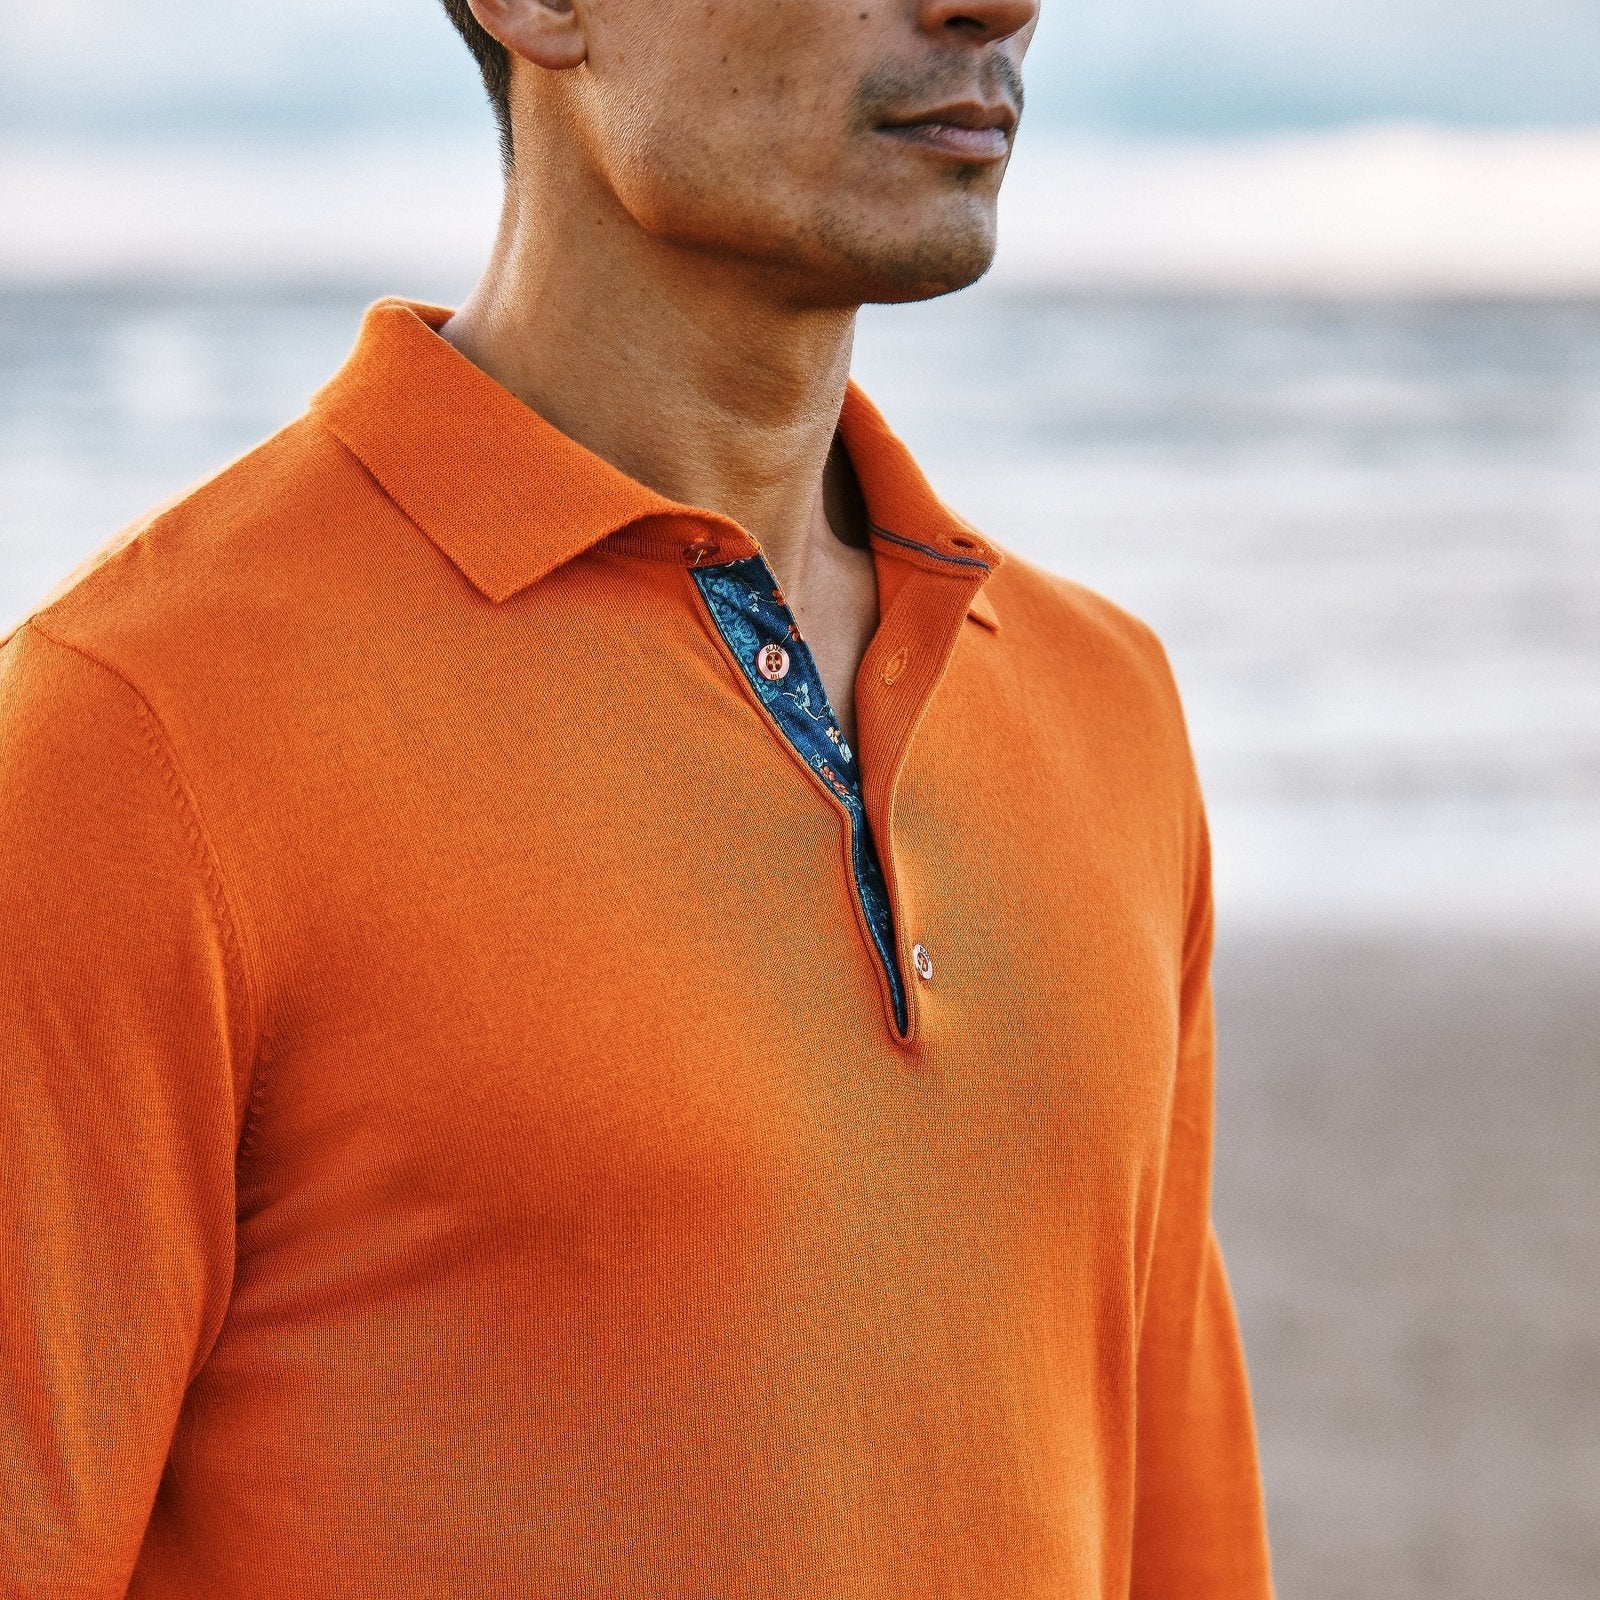 Orange Knit Polo with Flower Accents - Blake Mill